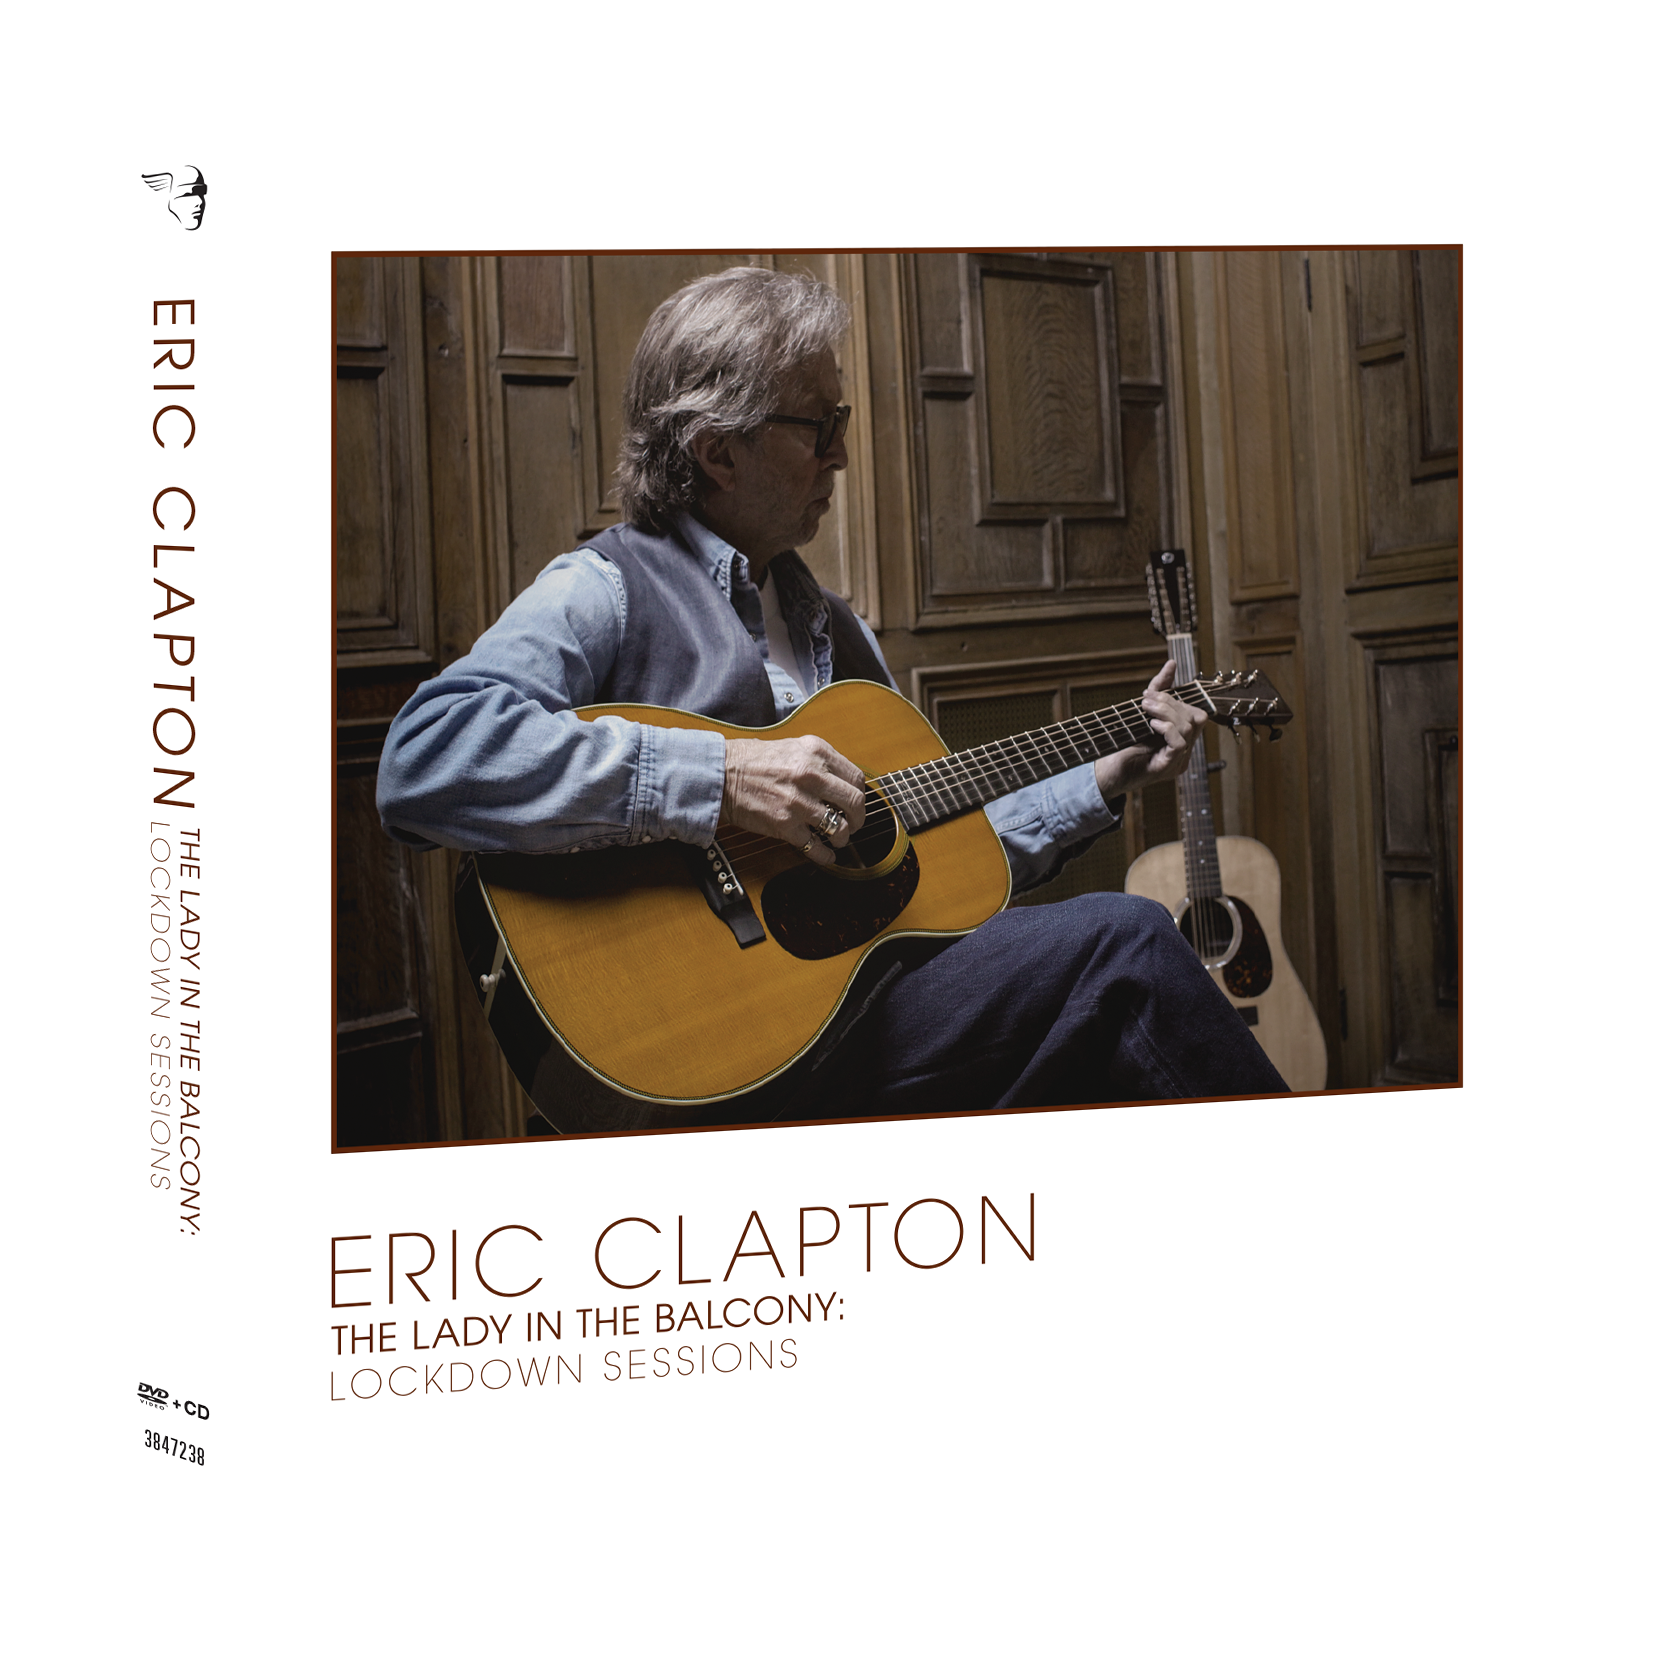 Eric Clapton - The Lady In The Balcony - Lockdown Sessions: DVD + CD